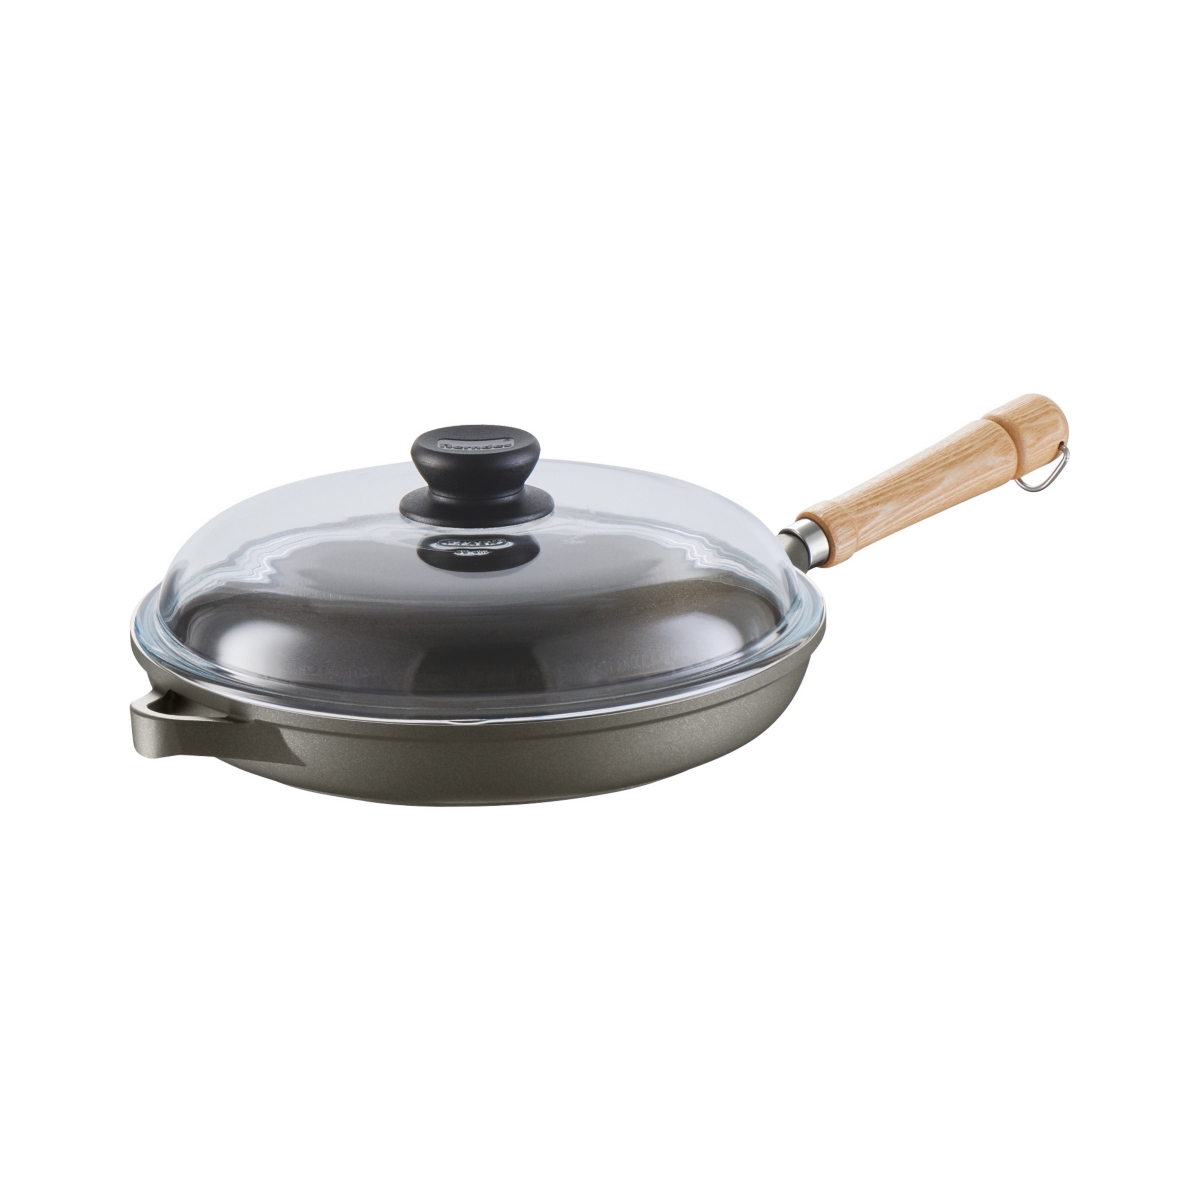 6799844 Berndes Tradition Induction 13 Fry Pan with lid sku 6799844